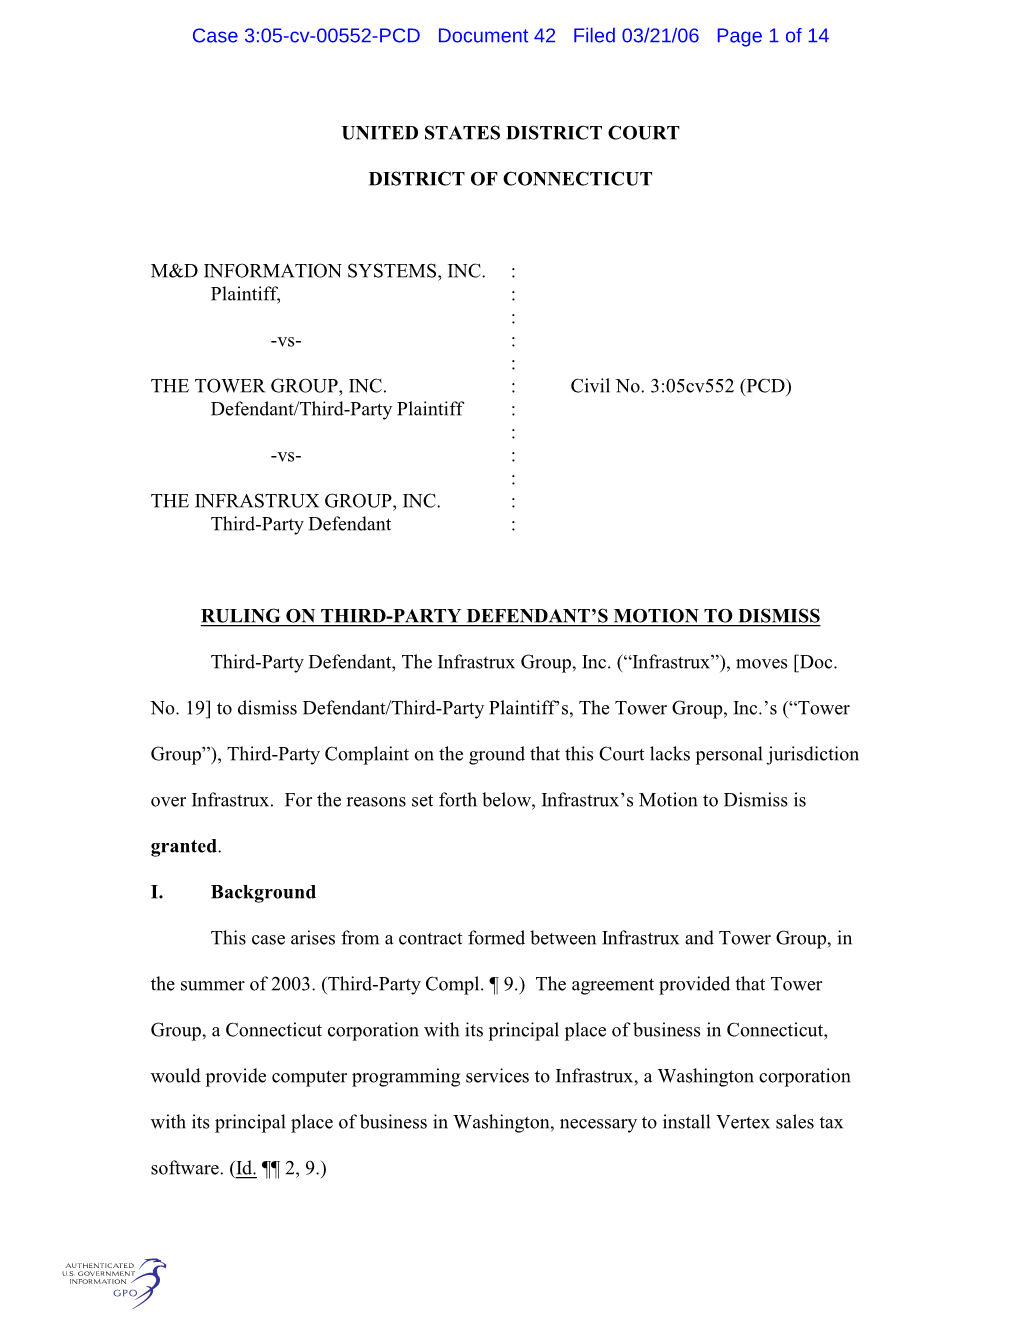 UNITED STATES DISTRICT COURT DISTRICT of CONNECTICUT M&D INFORMATION SYSTEMS, INC. : Plaintiff, : : -Vs- : : the TOWER GROUP